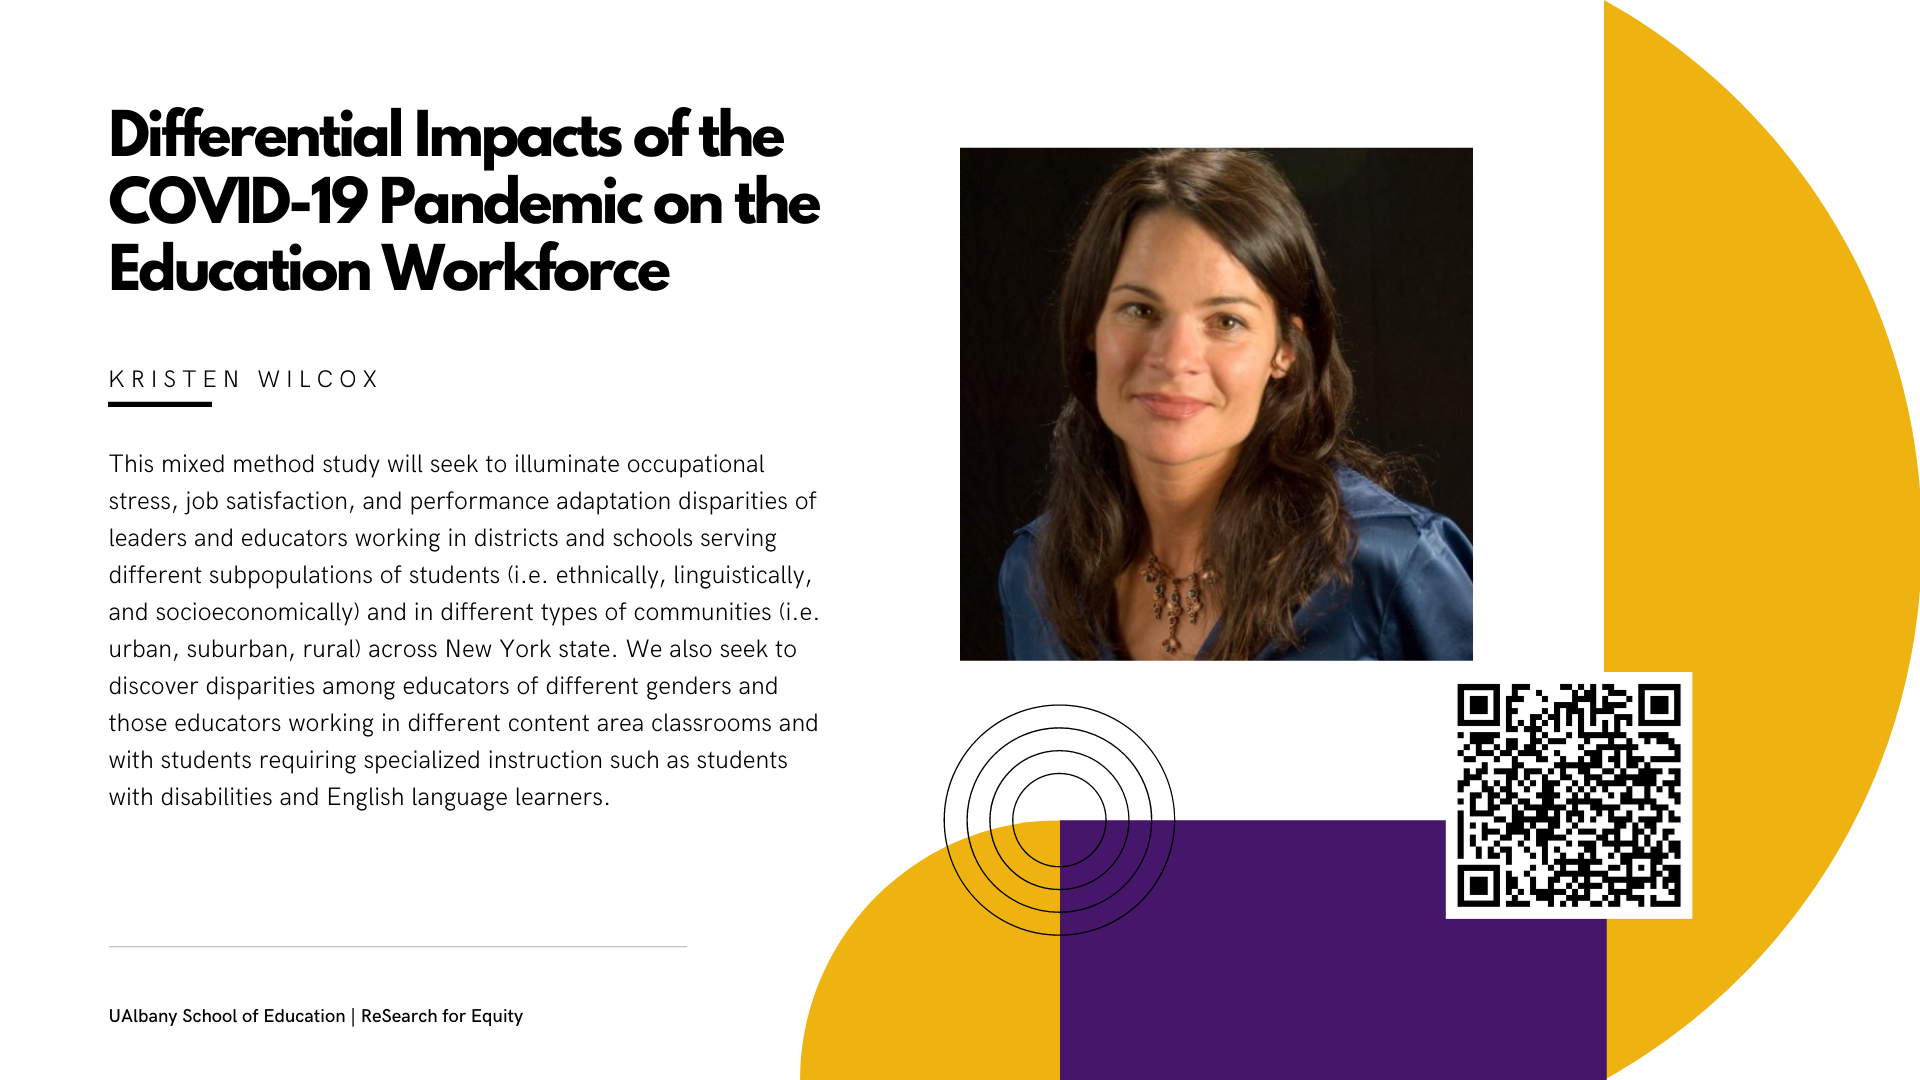 white slide with title and same text as caption, purple and yellow shapes to the right, photo of Kristen Wilcox in blue blouse with black background, QR code